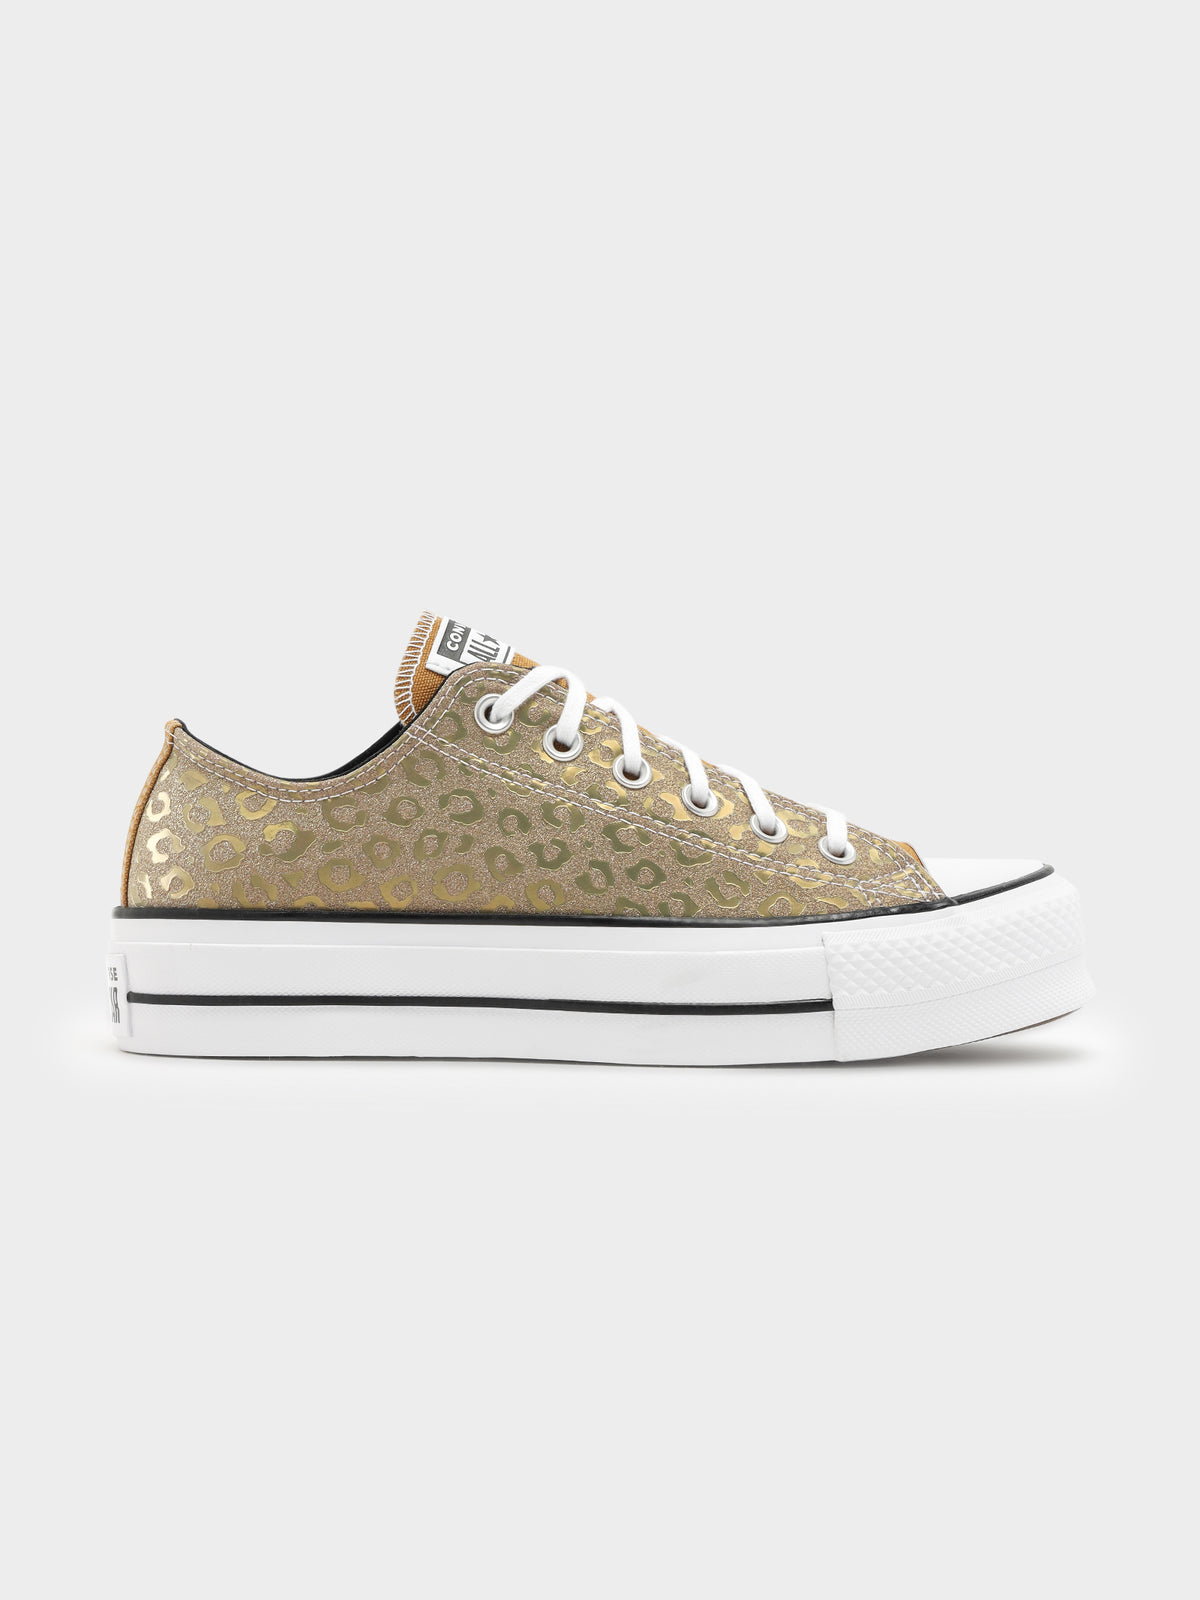 Womens Chuck Taylor All Star Lift Authentic Glam Low Top Sneakers in Gold Leopard